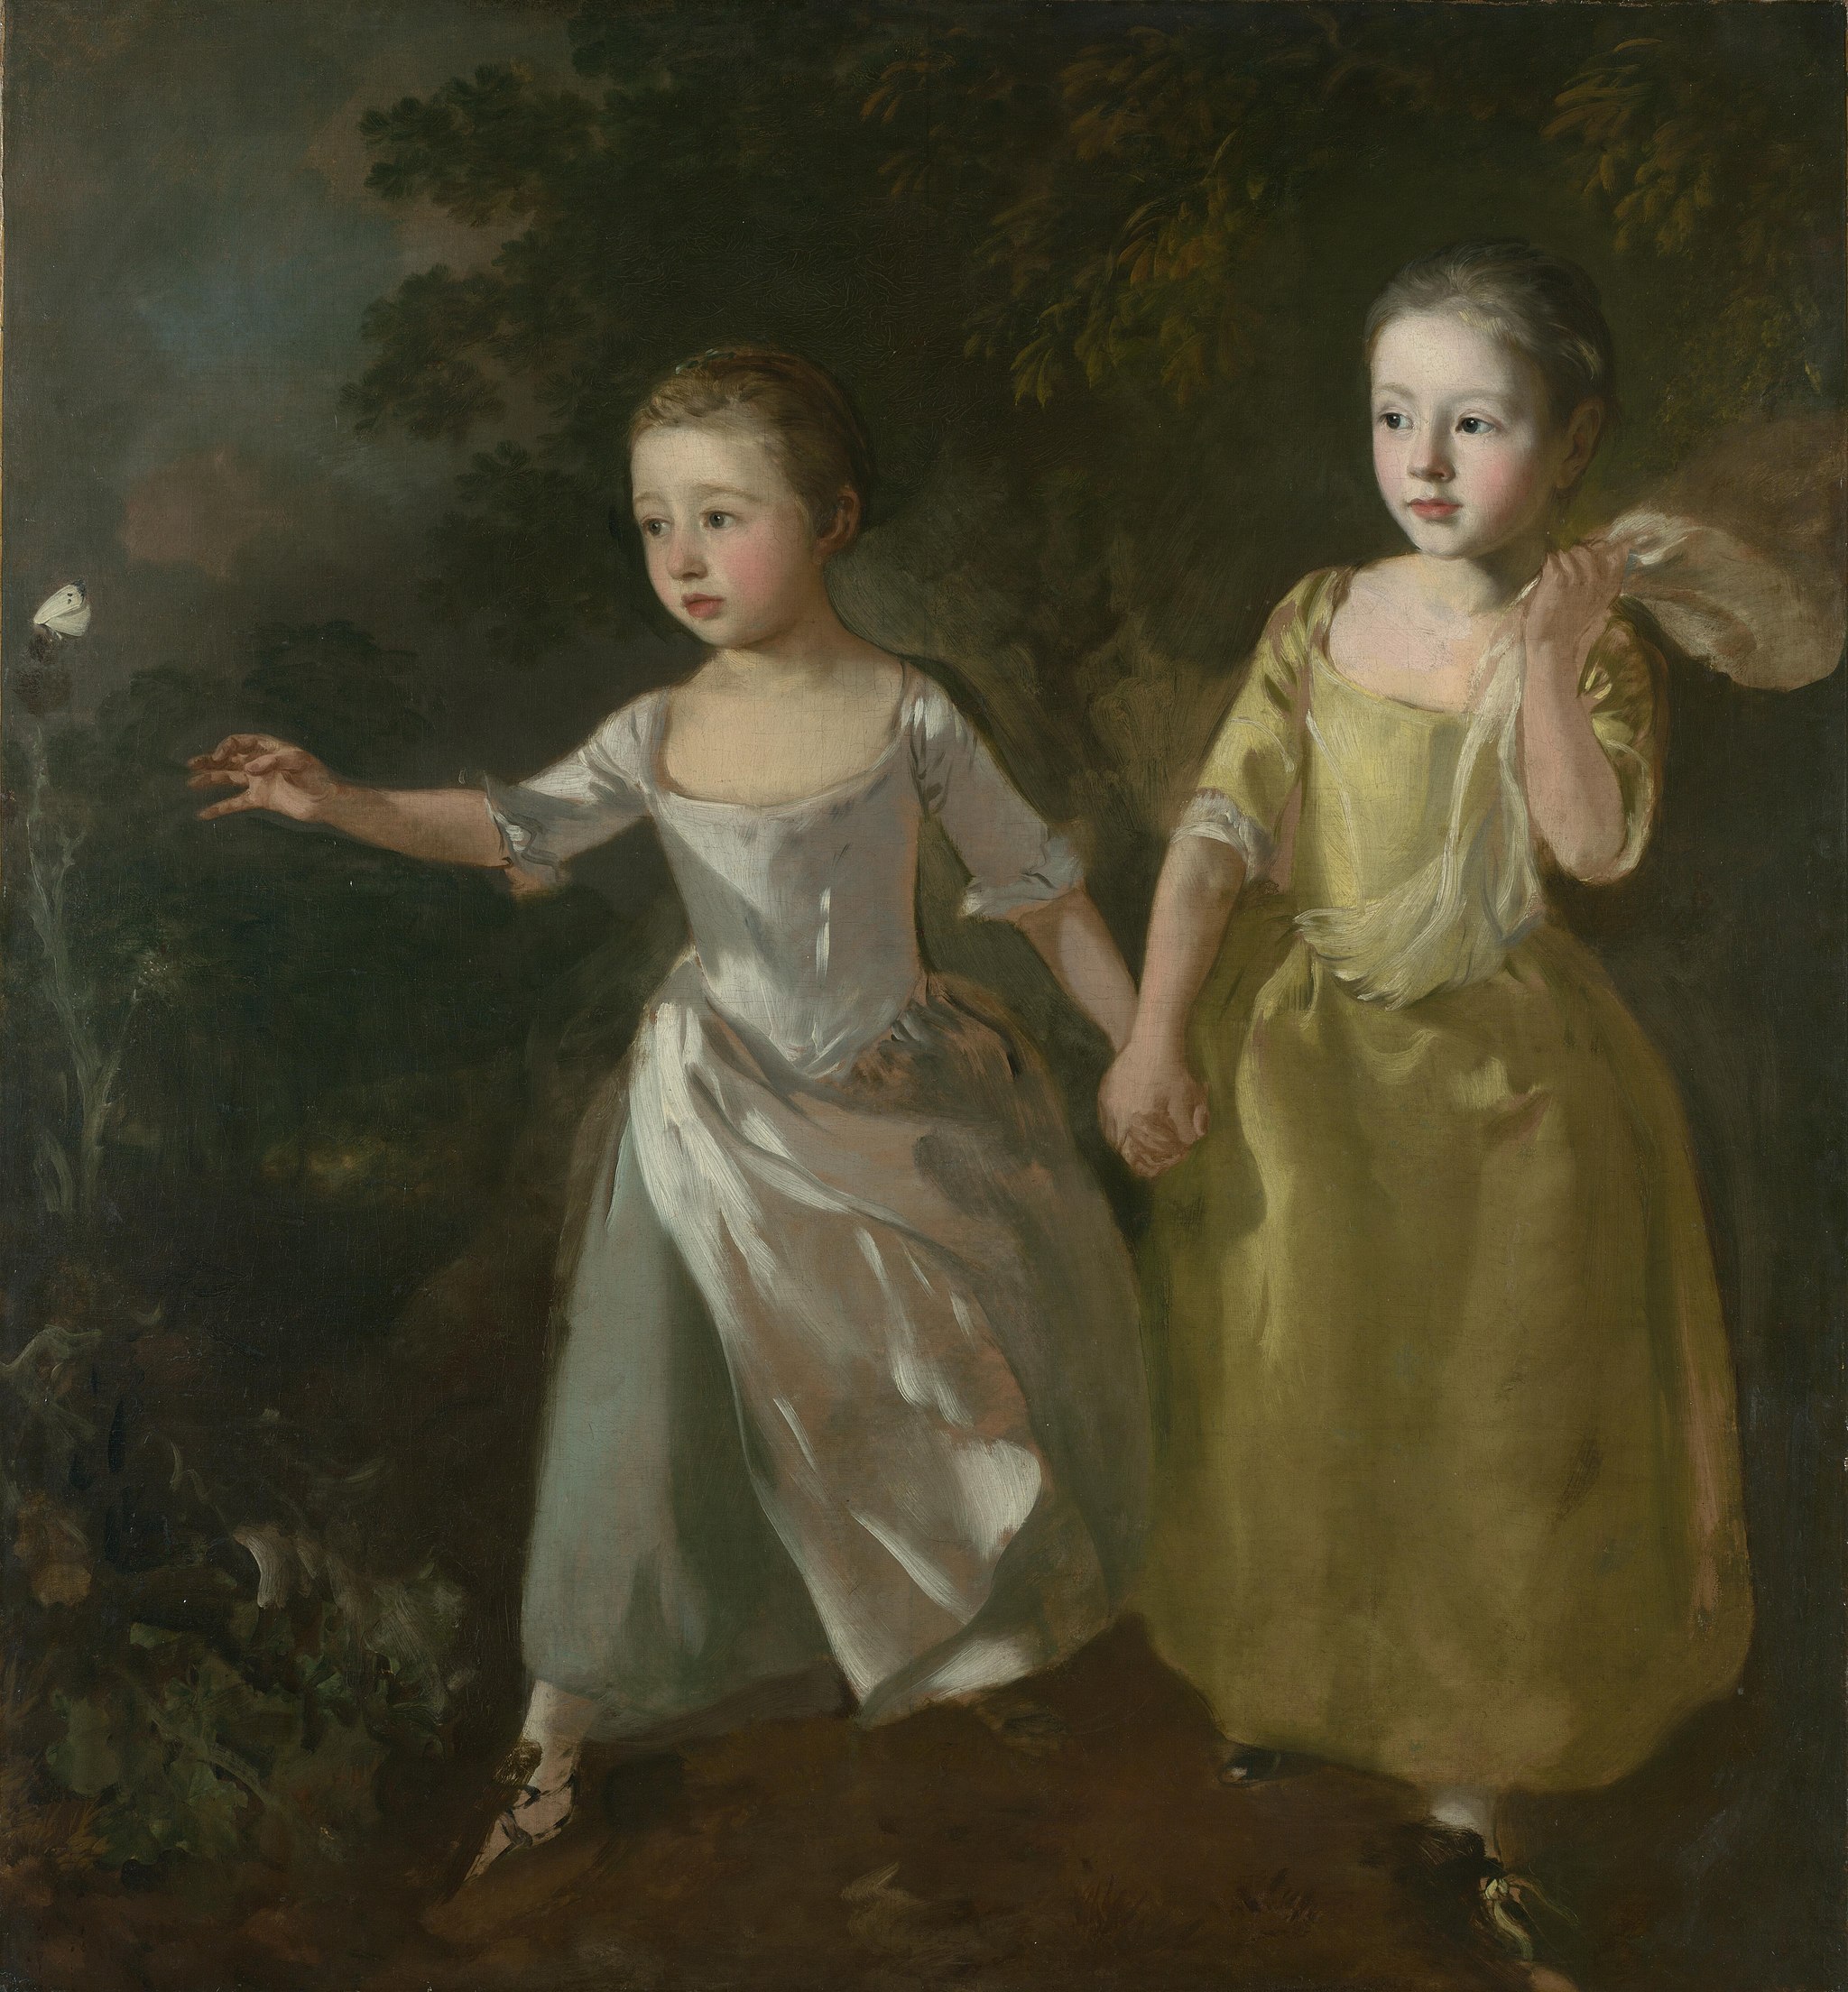 Thomas Gainsborough, The Painter's Daughters chasing a Butterfly, c1756,